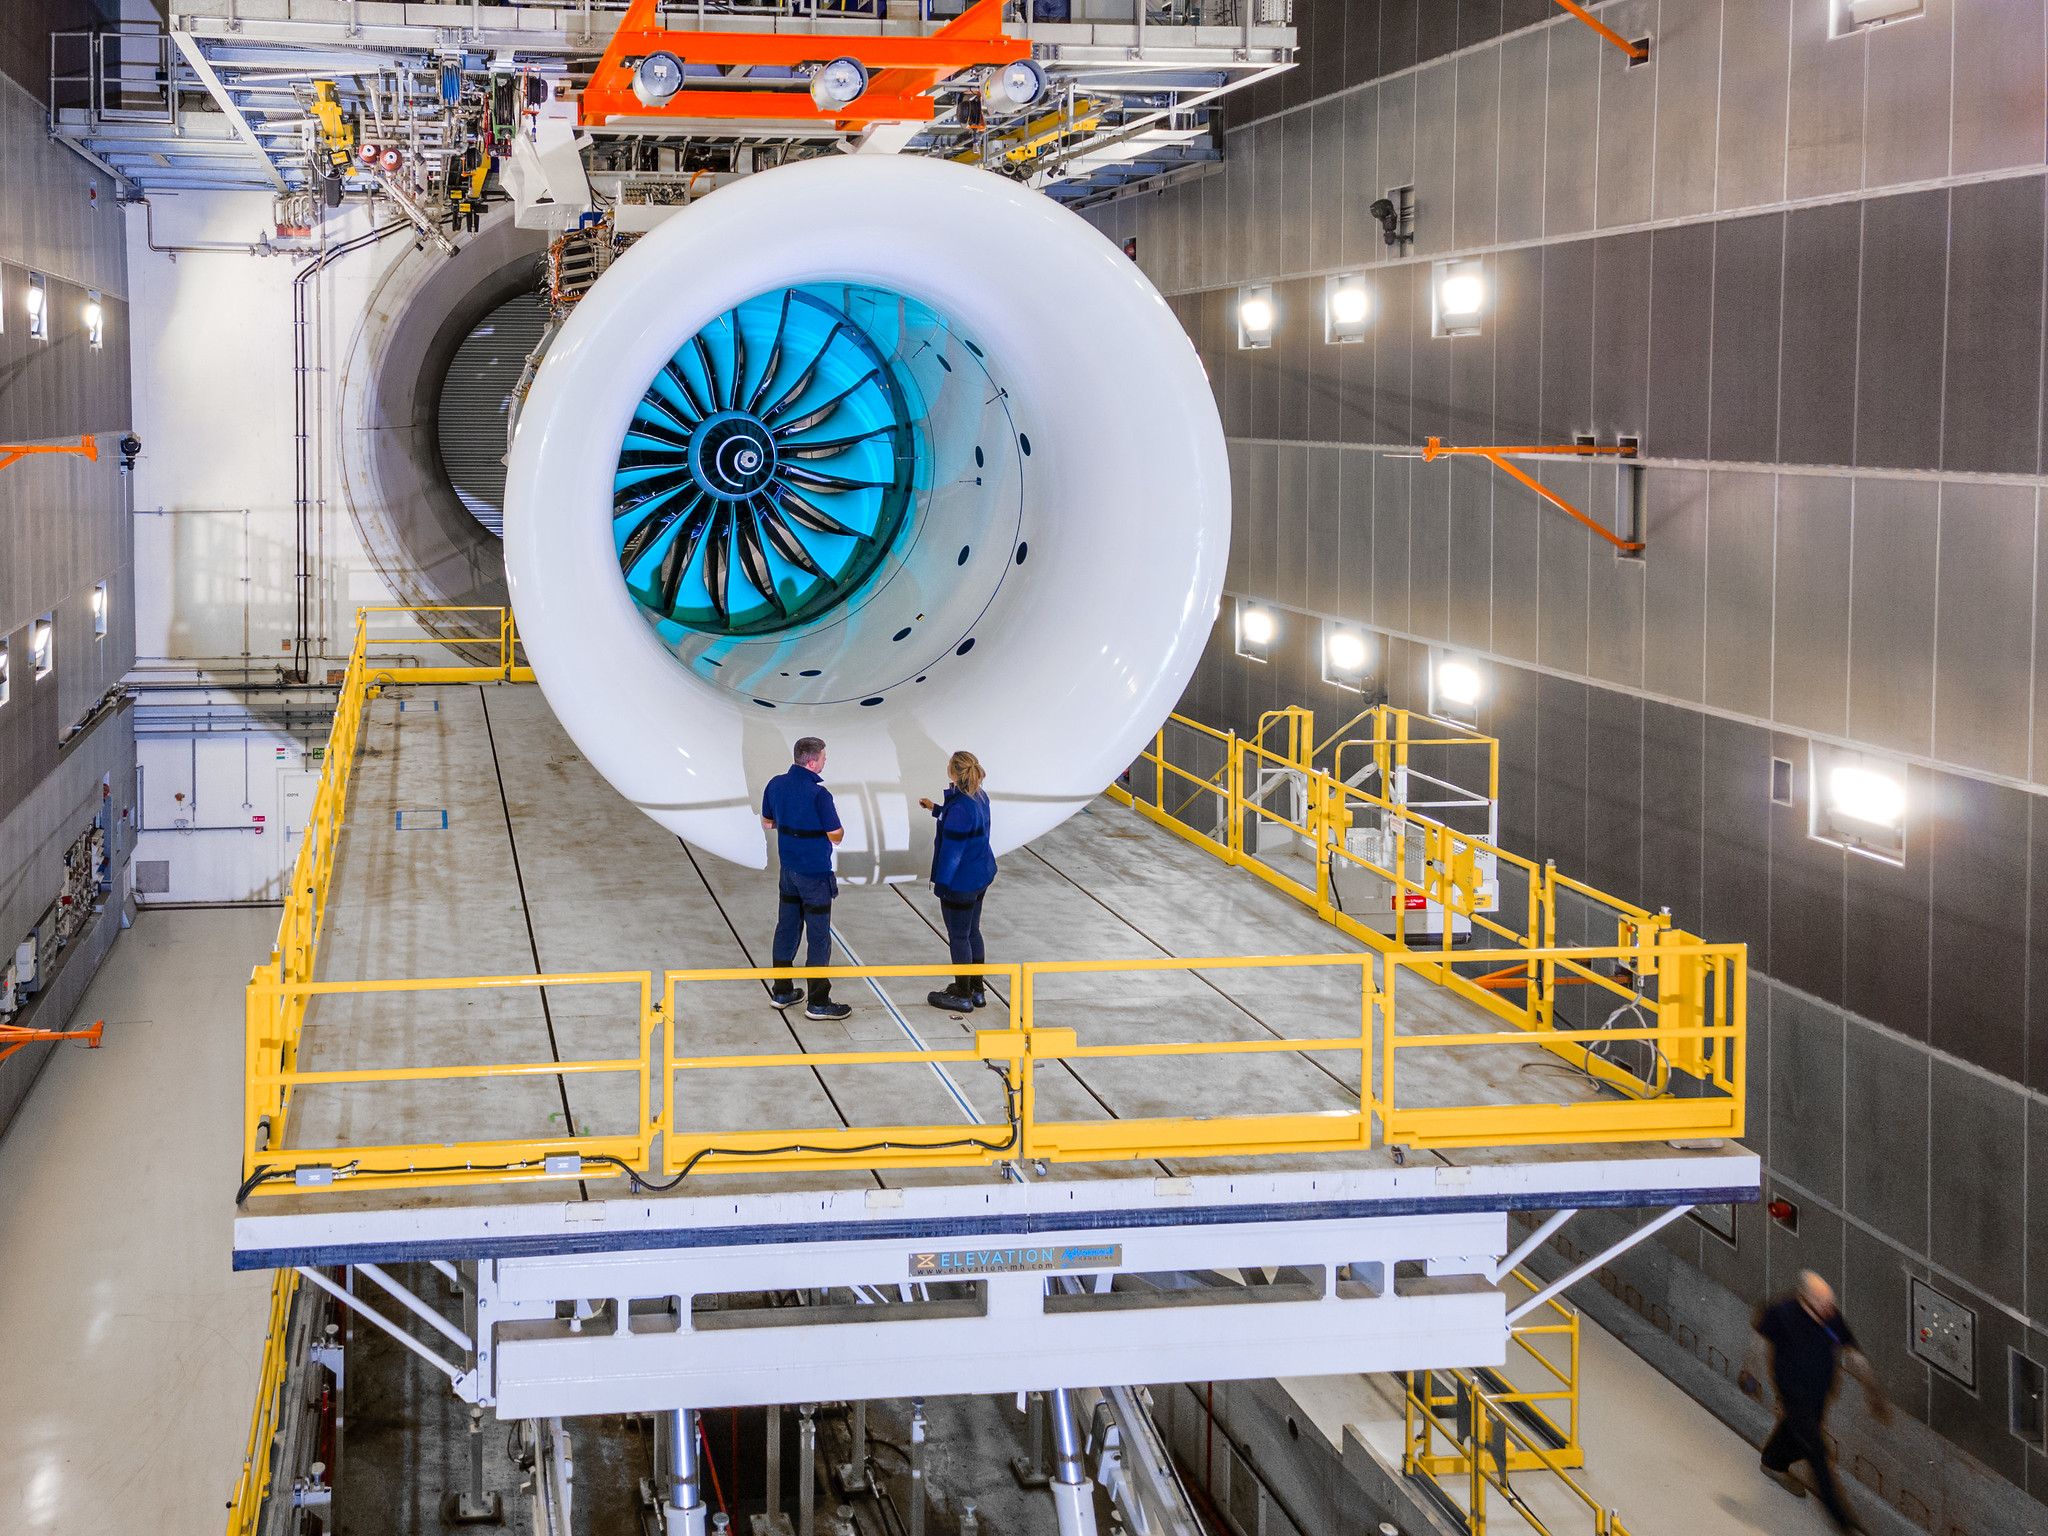 Press Release - Rolls-Royce Has  Successfully  Completed  The  First  Tests  Of  Its  UltraFan  Technology  Demonstrator.